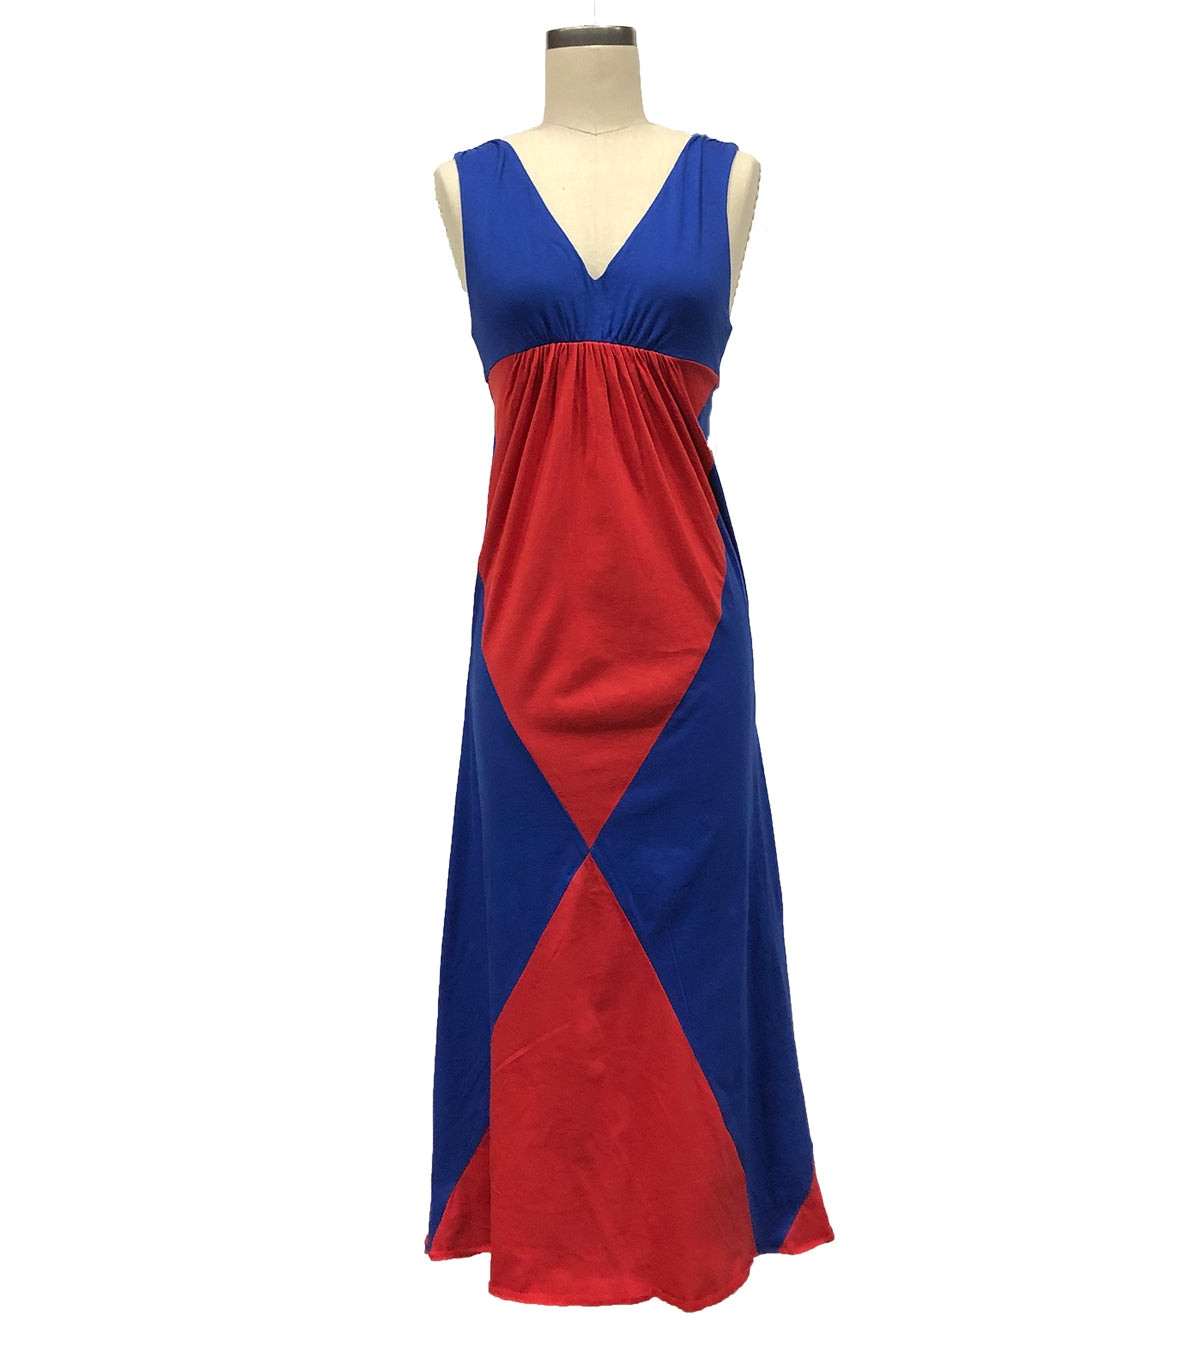 Cotton Color Block Dress - Sleeveless Made in USA | RAMBLERS WAY